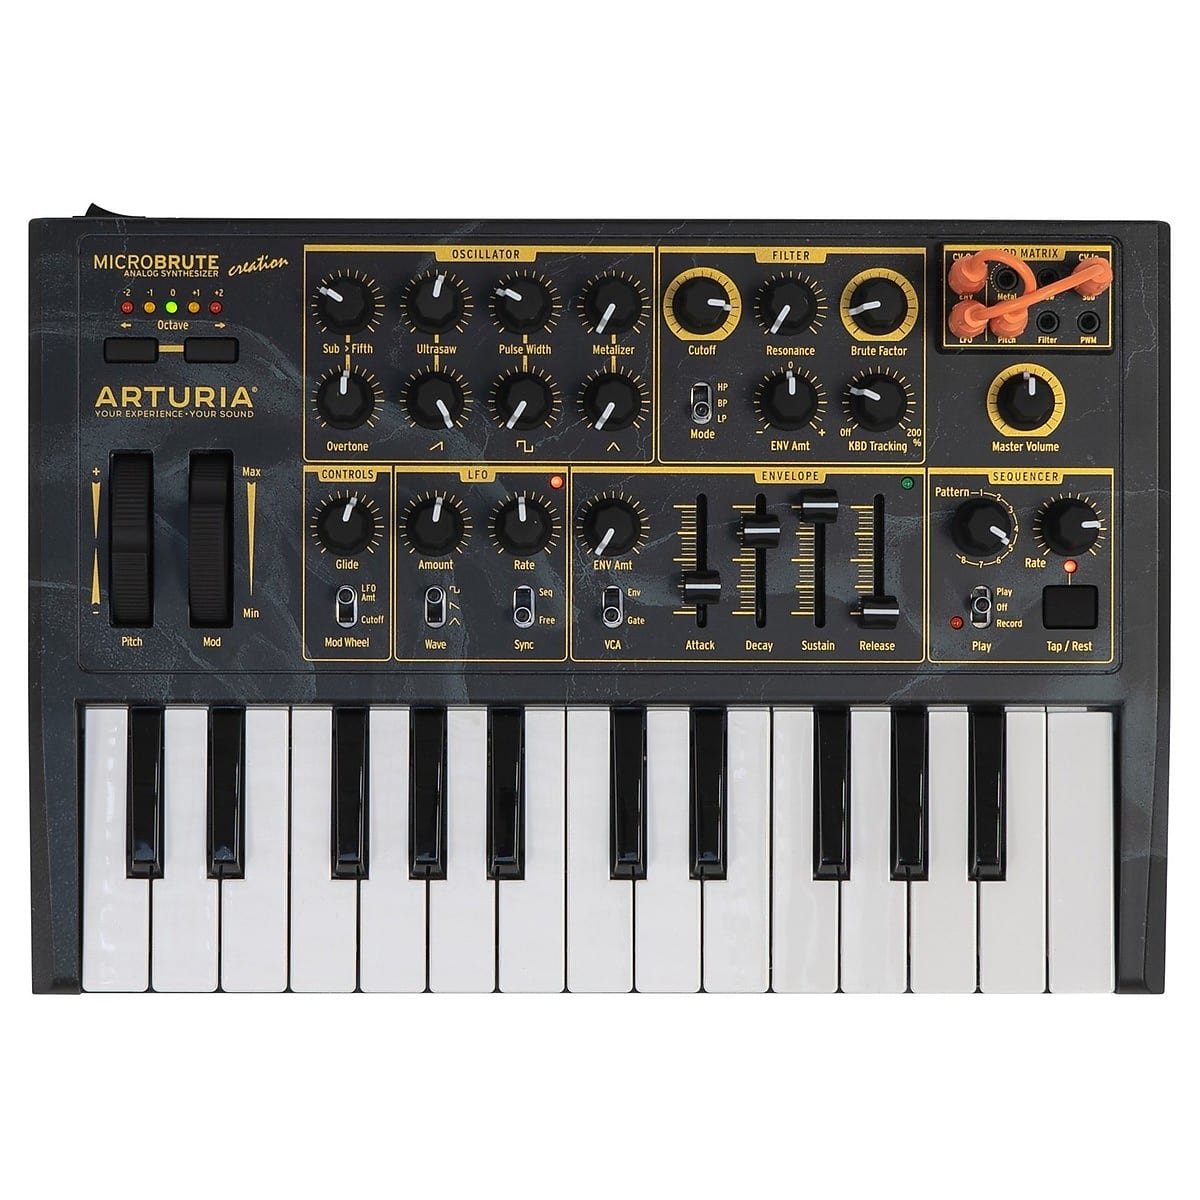 Arturia MicroBrute Creation 25-Key Synthesizer | Reverb